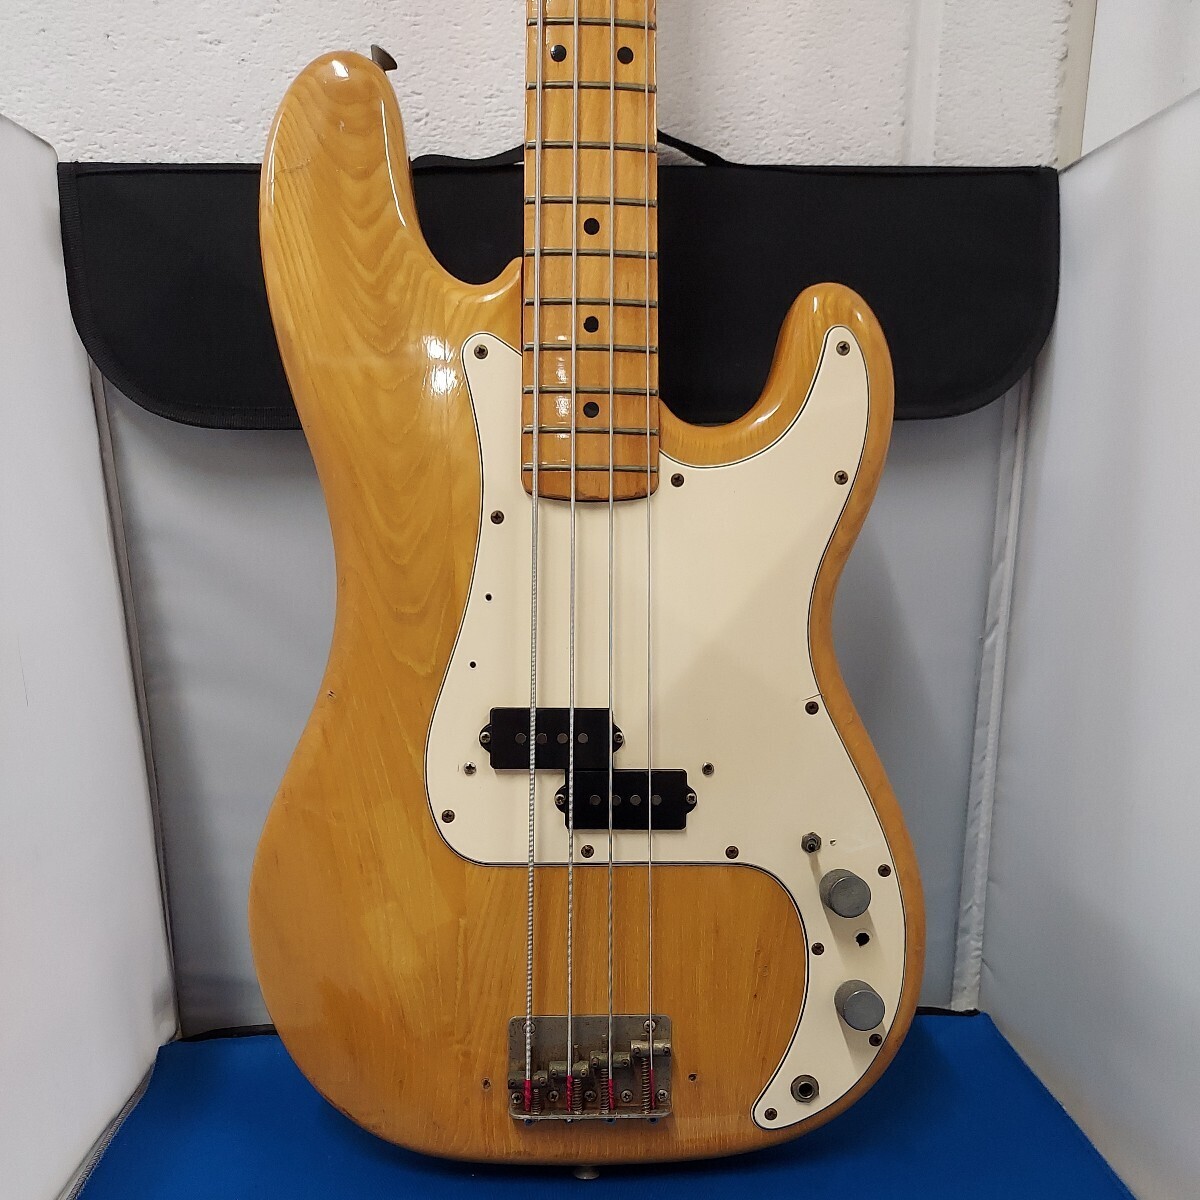 * operation verification settled * Japan Vintage Greco Greco ELECTRIC BASS Precision base / pre be*C772295 MADE IN JAPAN* stringed instruments * scratch many *